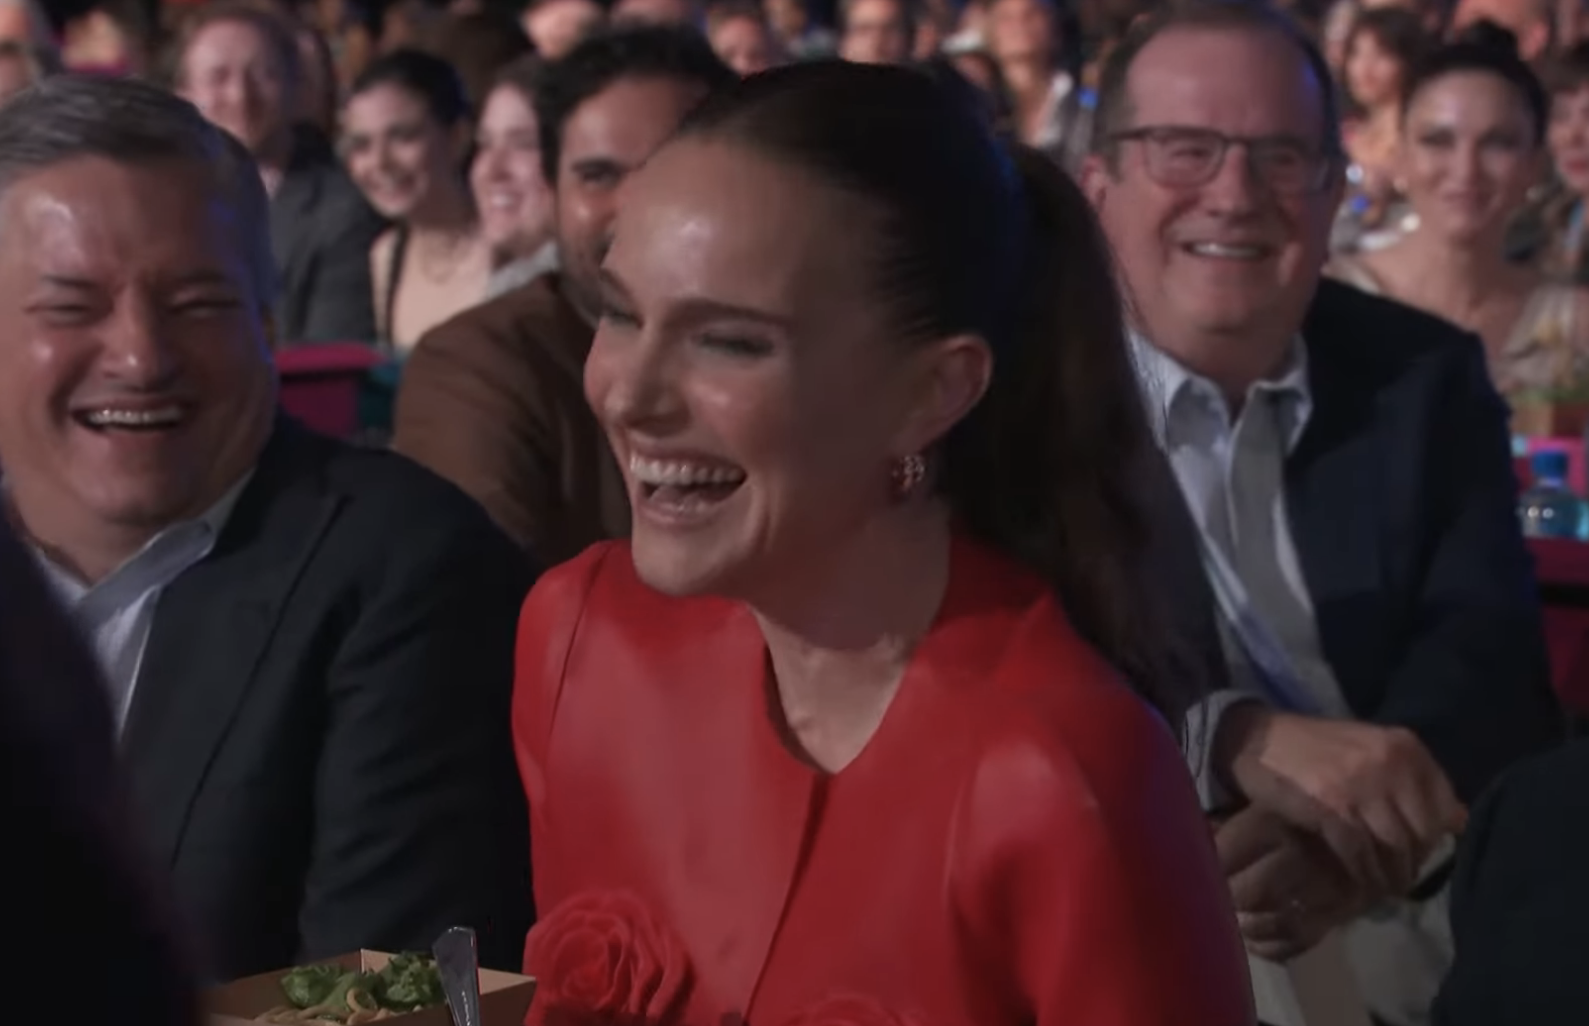 Natalie laughing with a joyful crowd around her